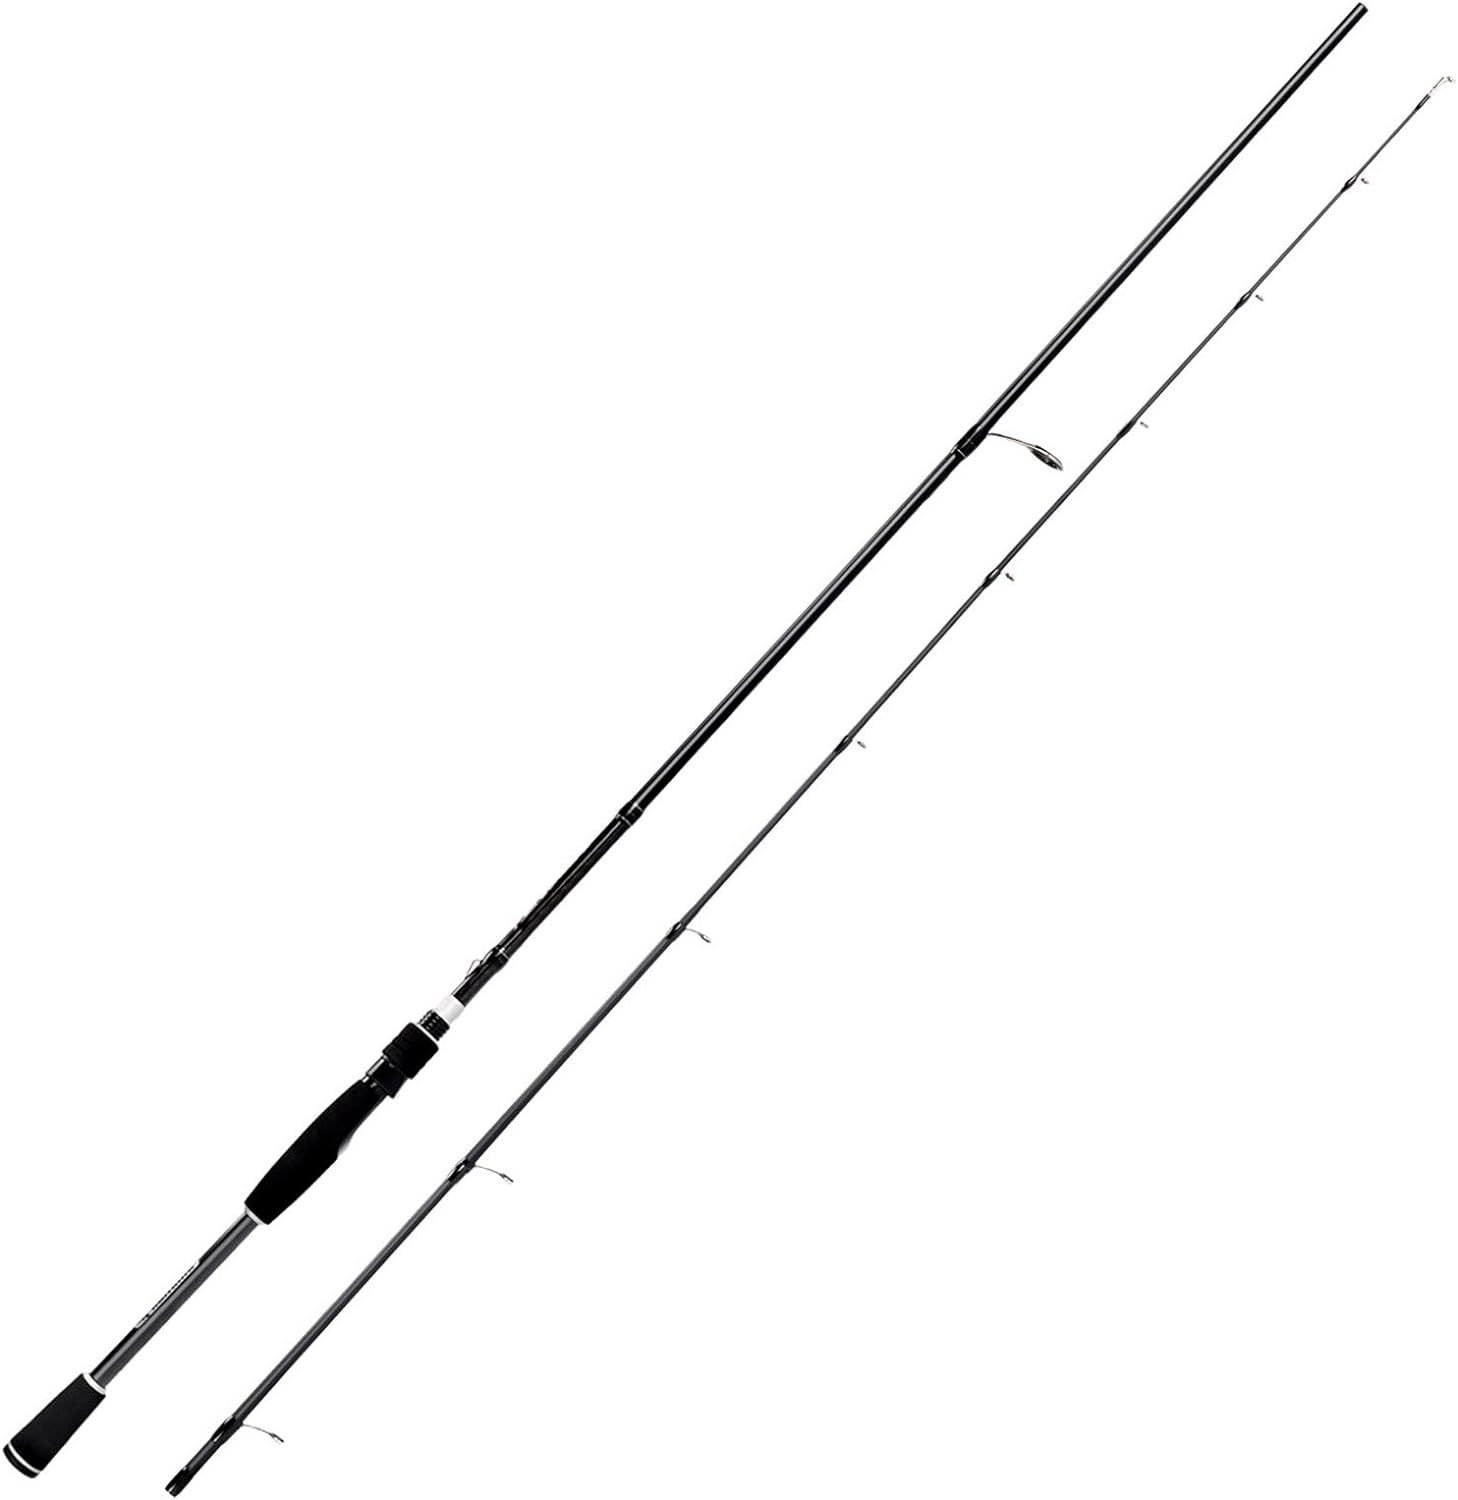 KastKing Perigee II Fishing Rods - Fuji O-Ring Line Guides, 24 Ton Carbon Fiber Casting and Spinn... | Amazon (US)